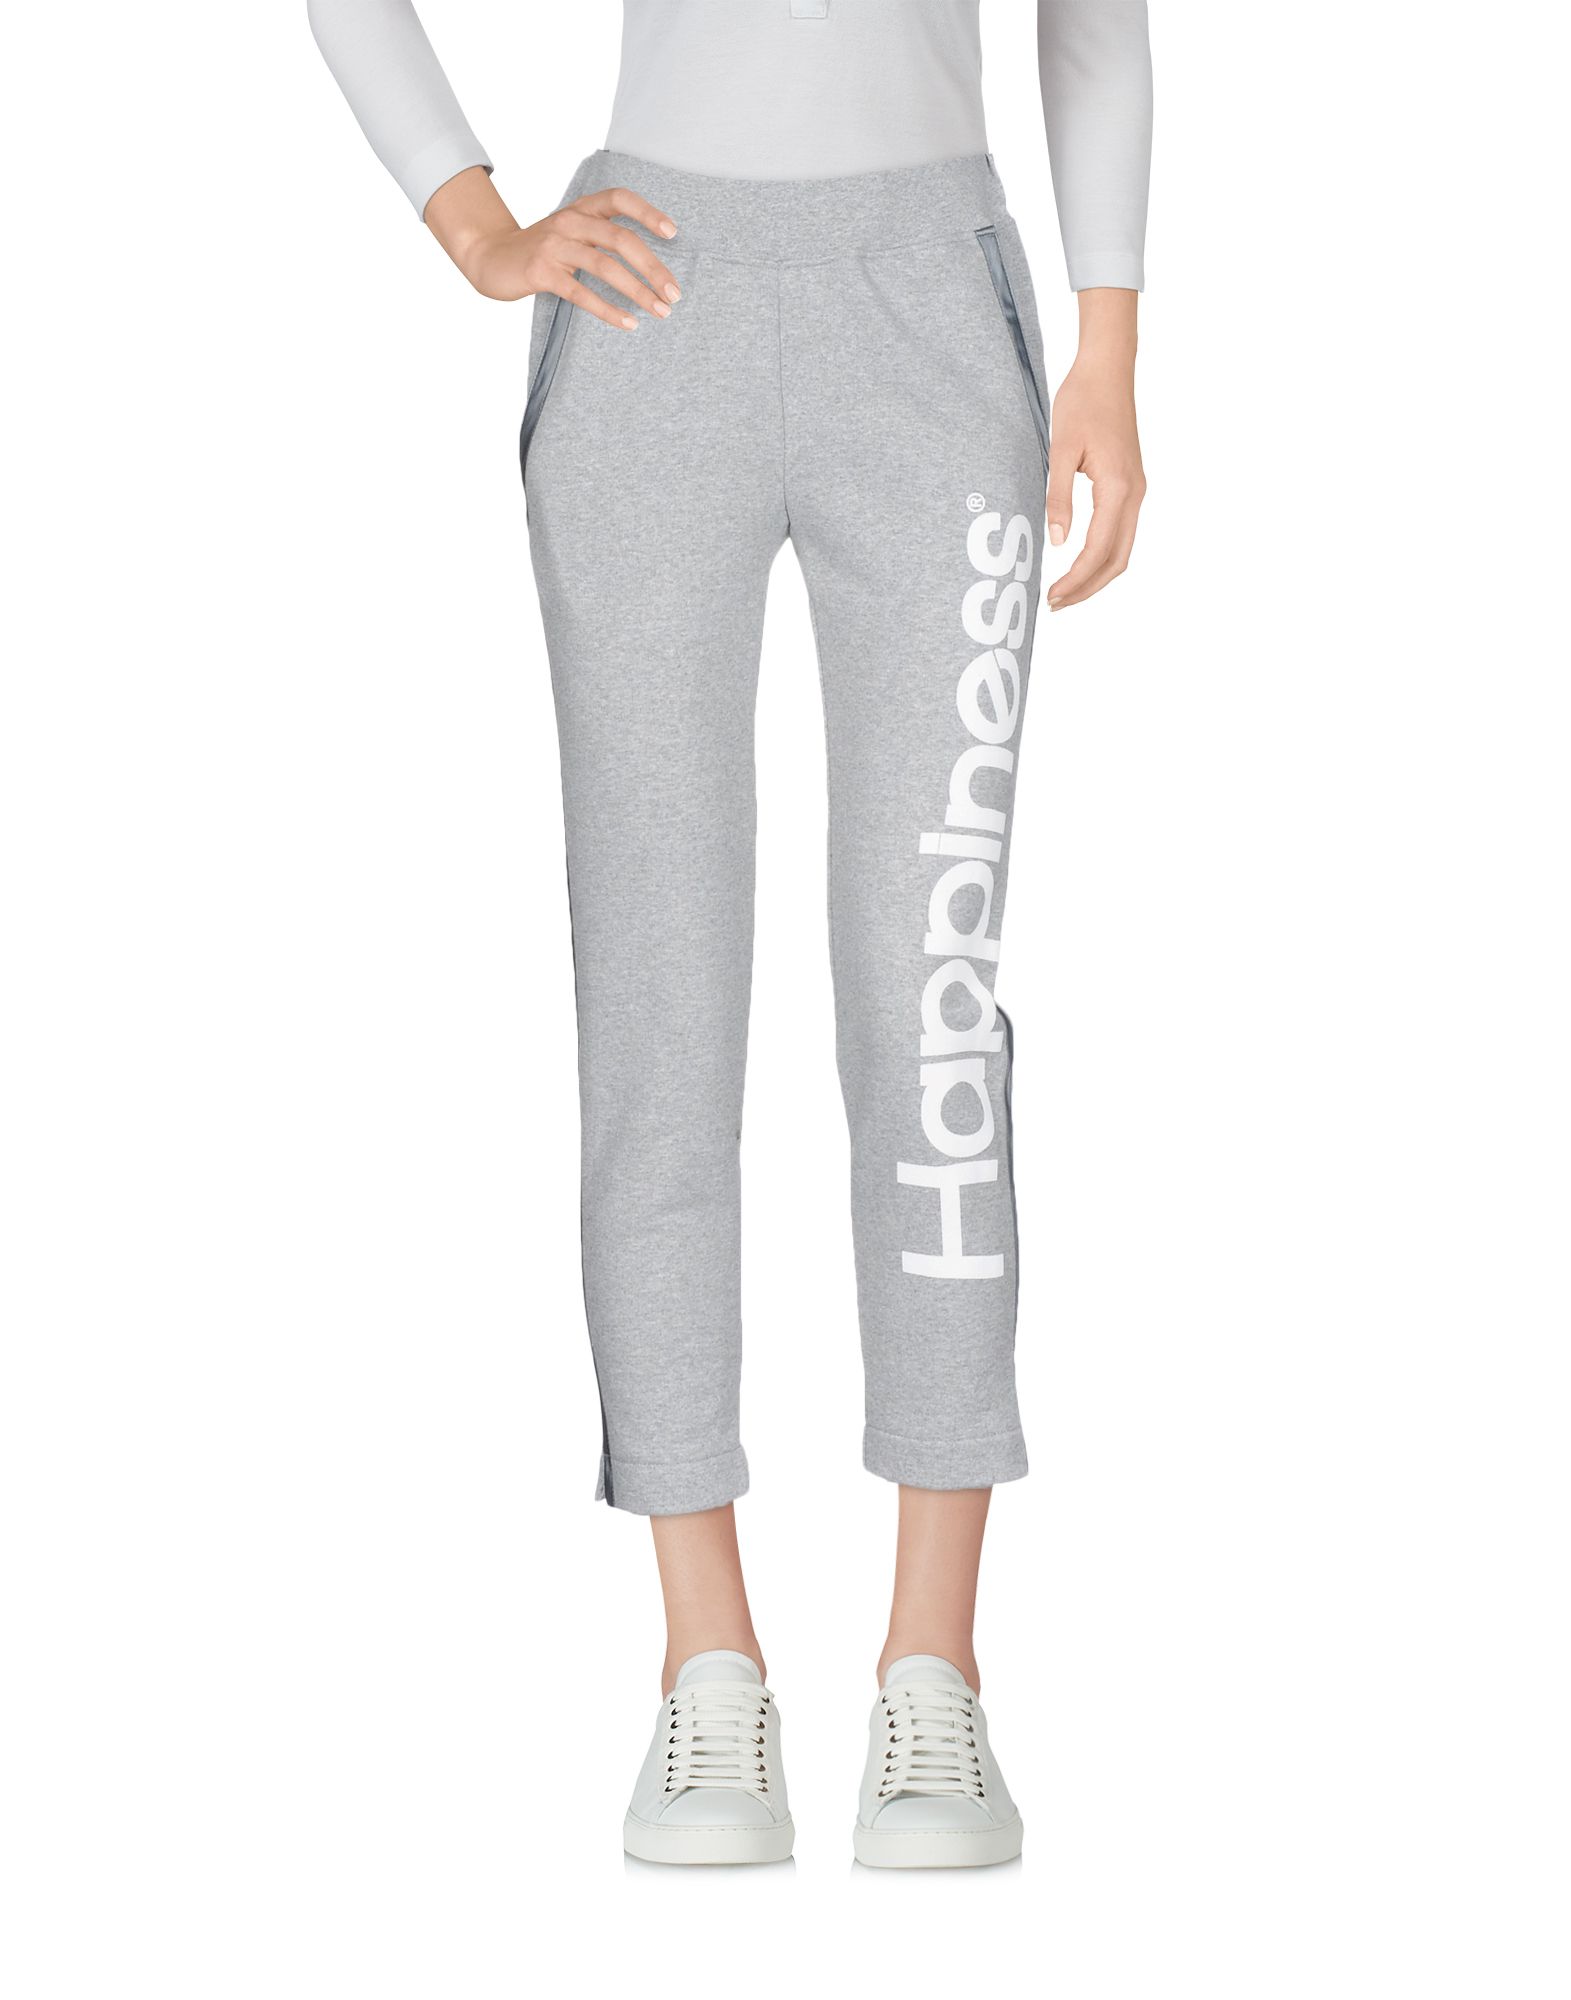 HAPPINESS Casual pants,13180252NV 3